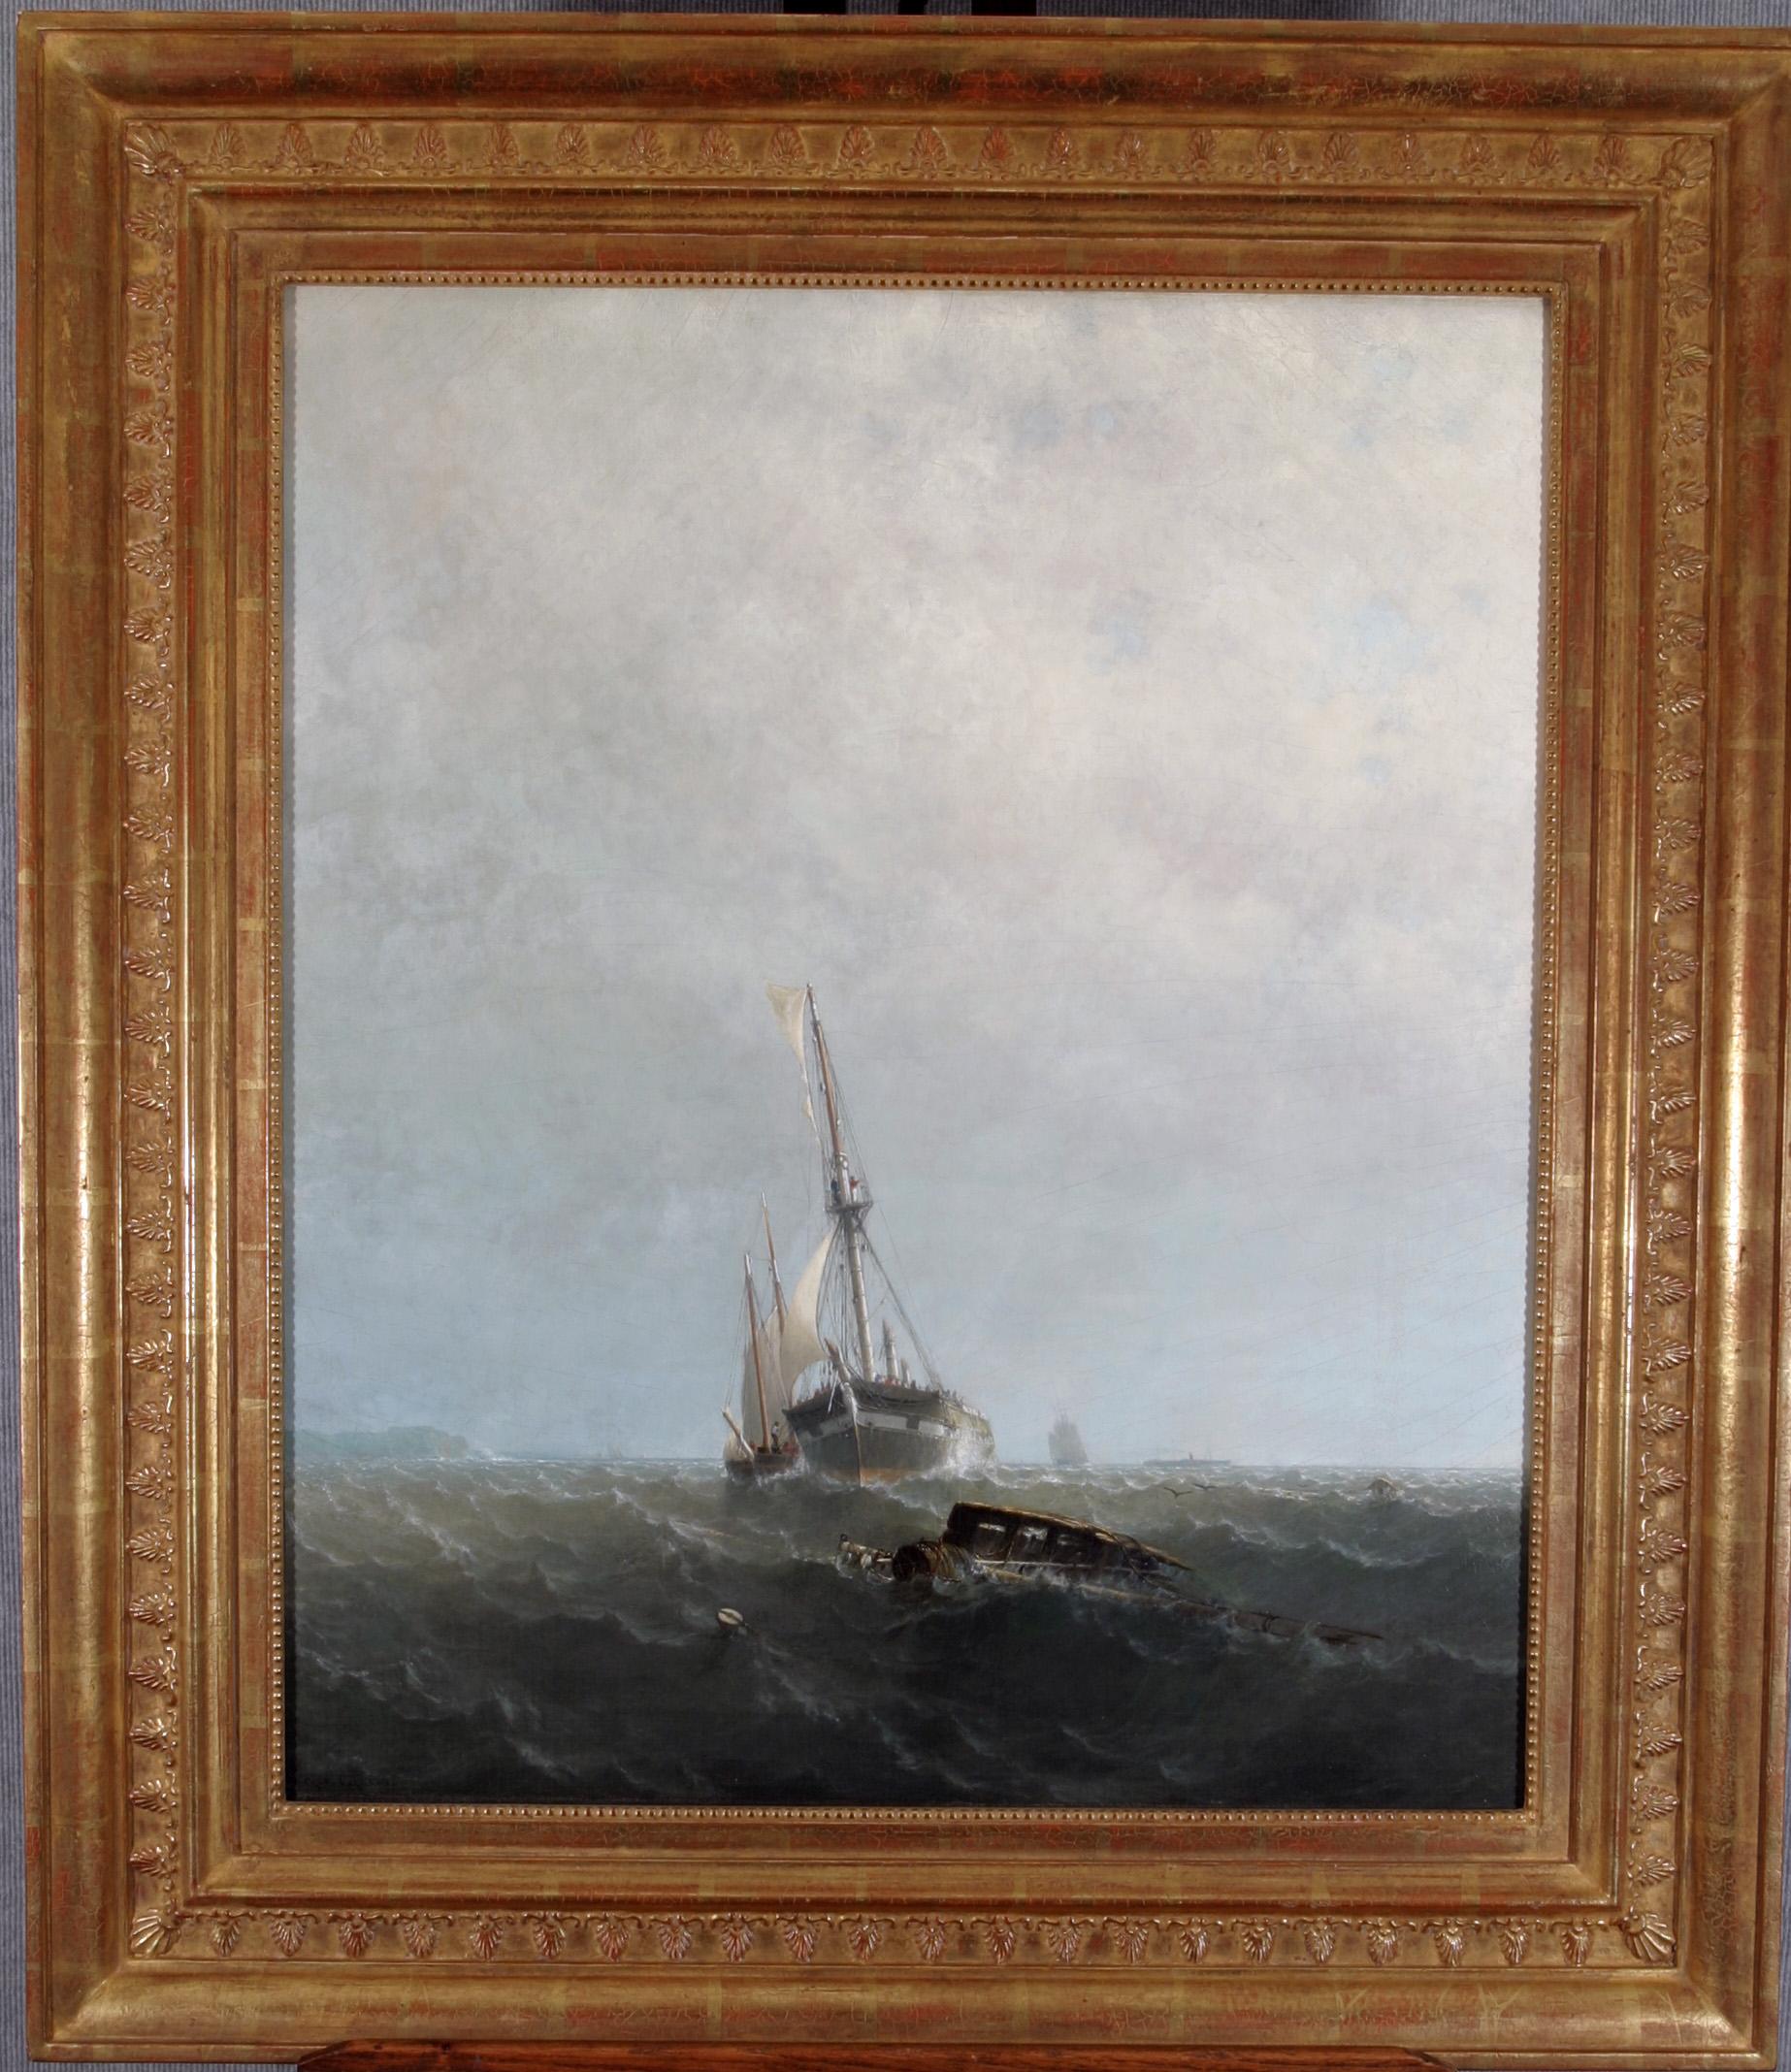 The Broken Mast - Painting by George Curtis